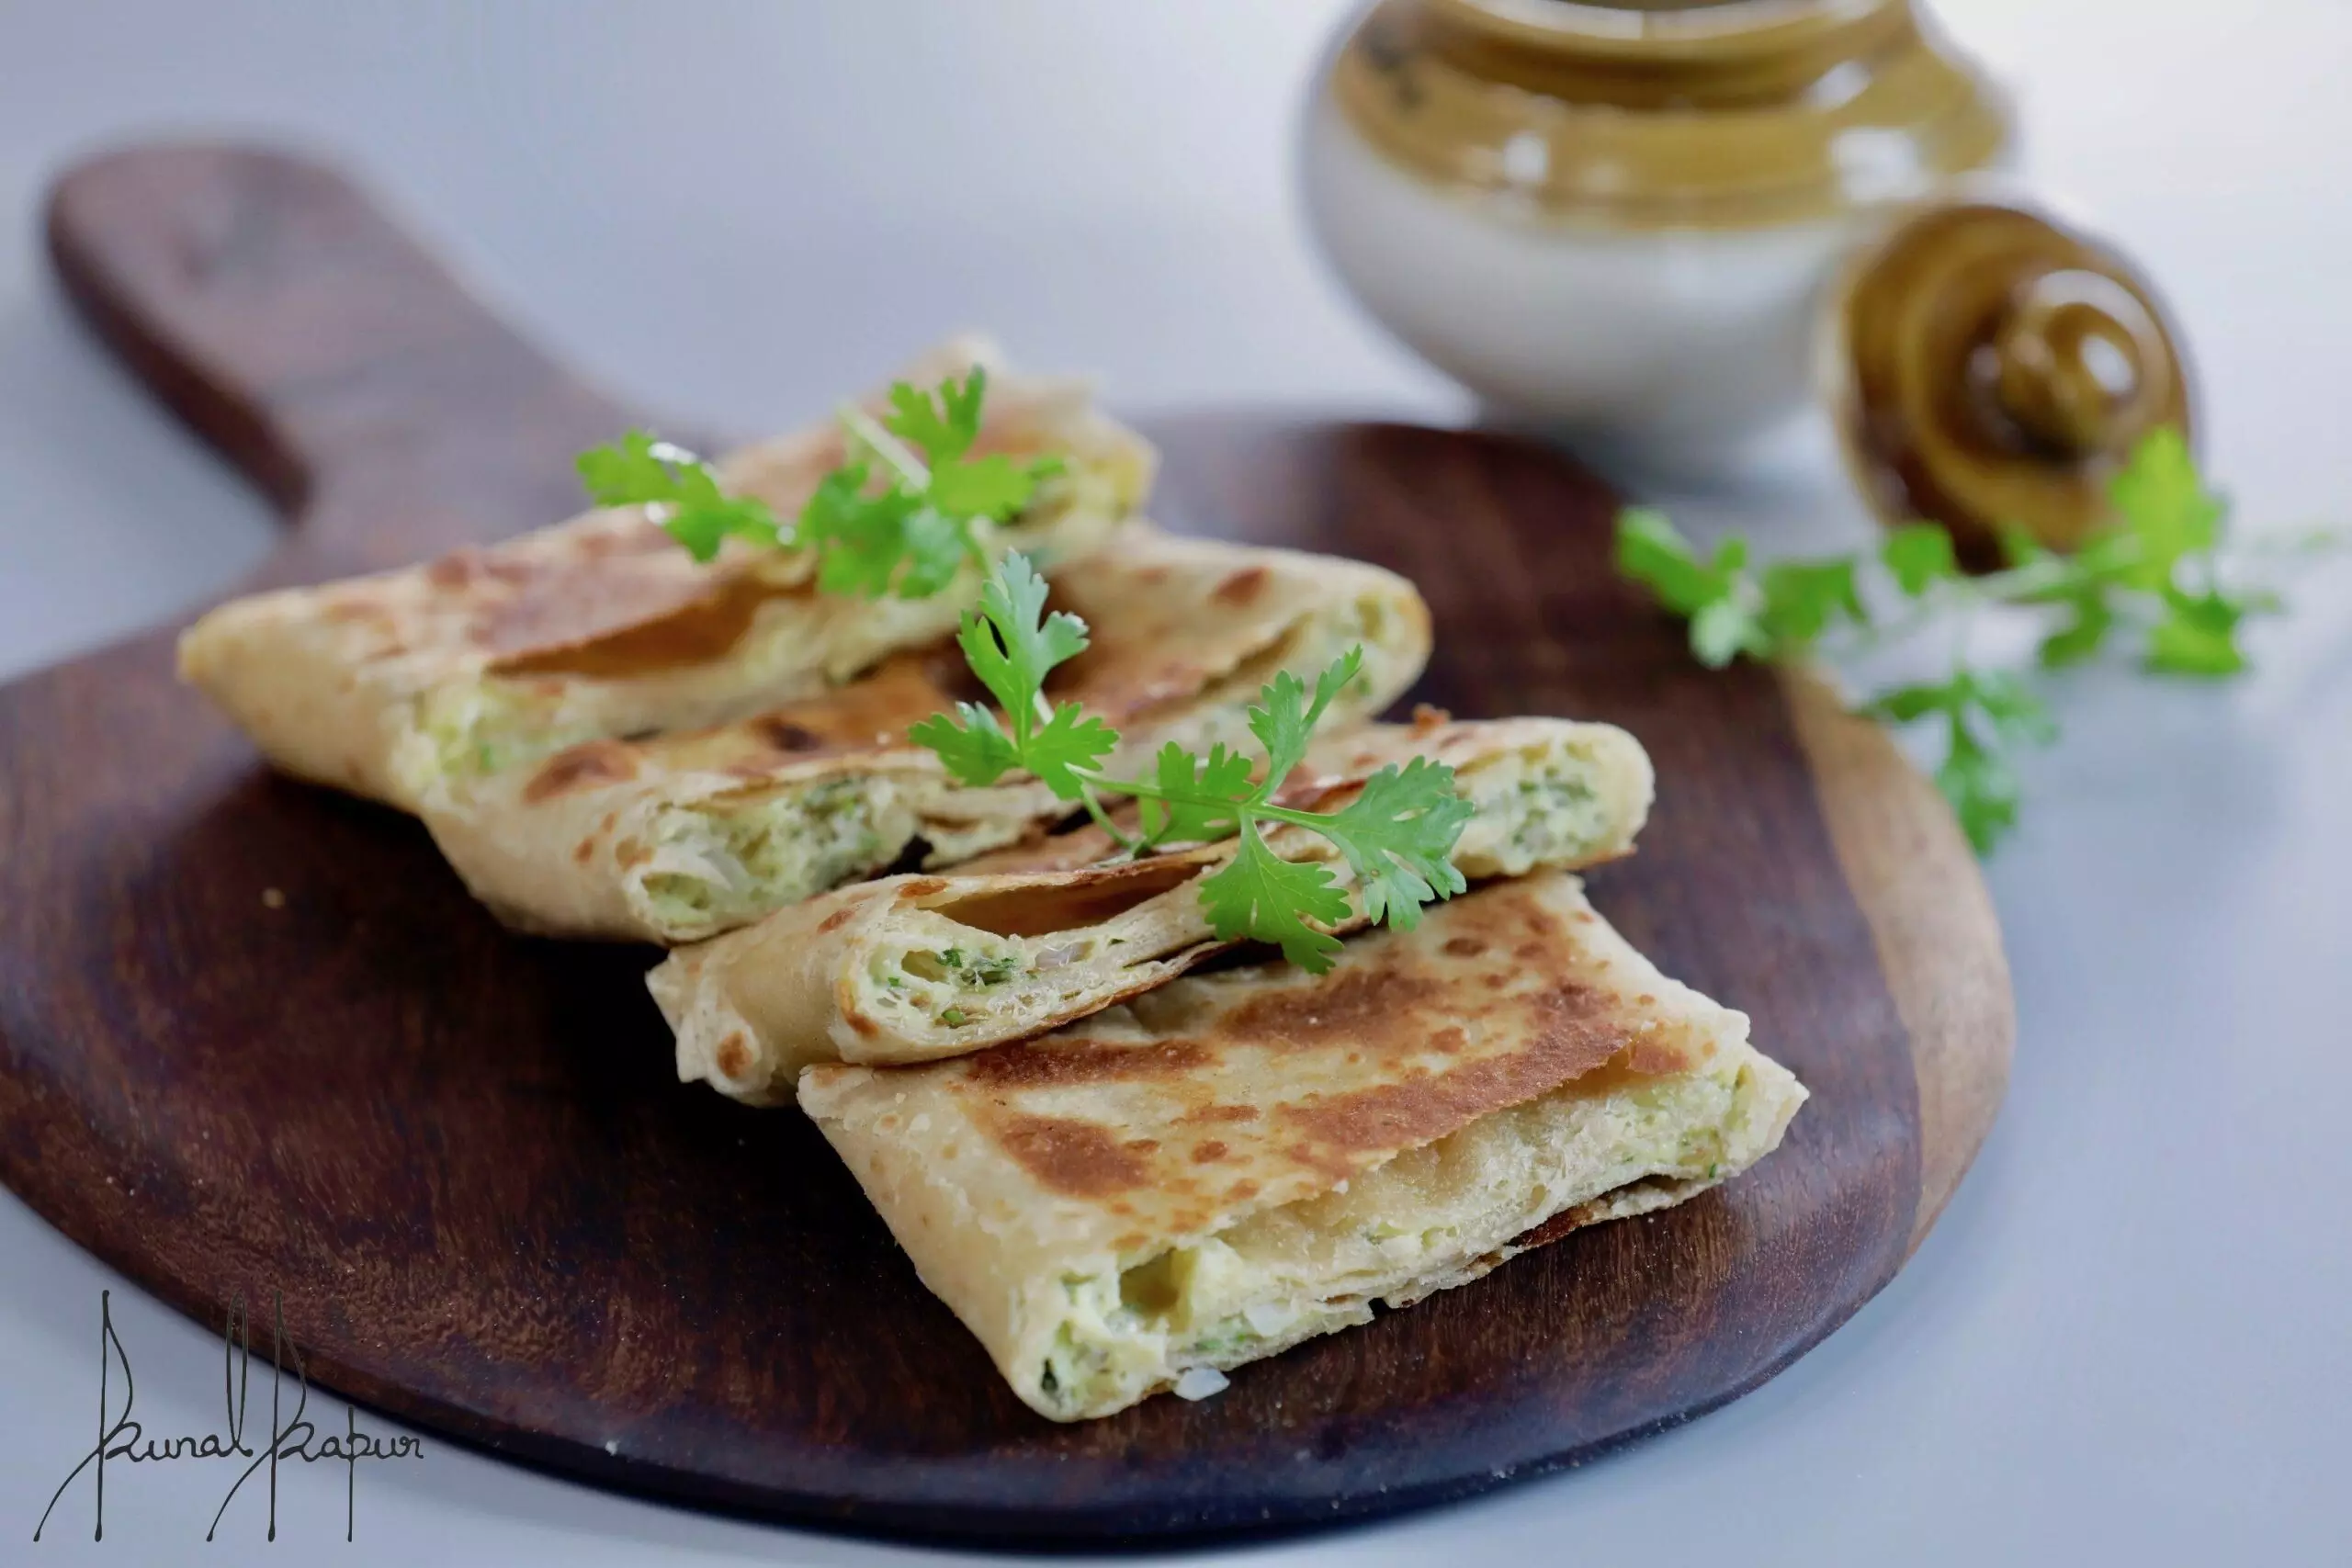 Anda Paratha recipe: It is one classic fusion recipe that you would find on the streets